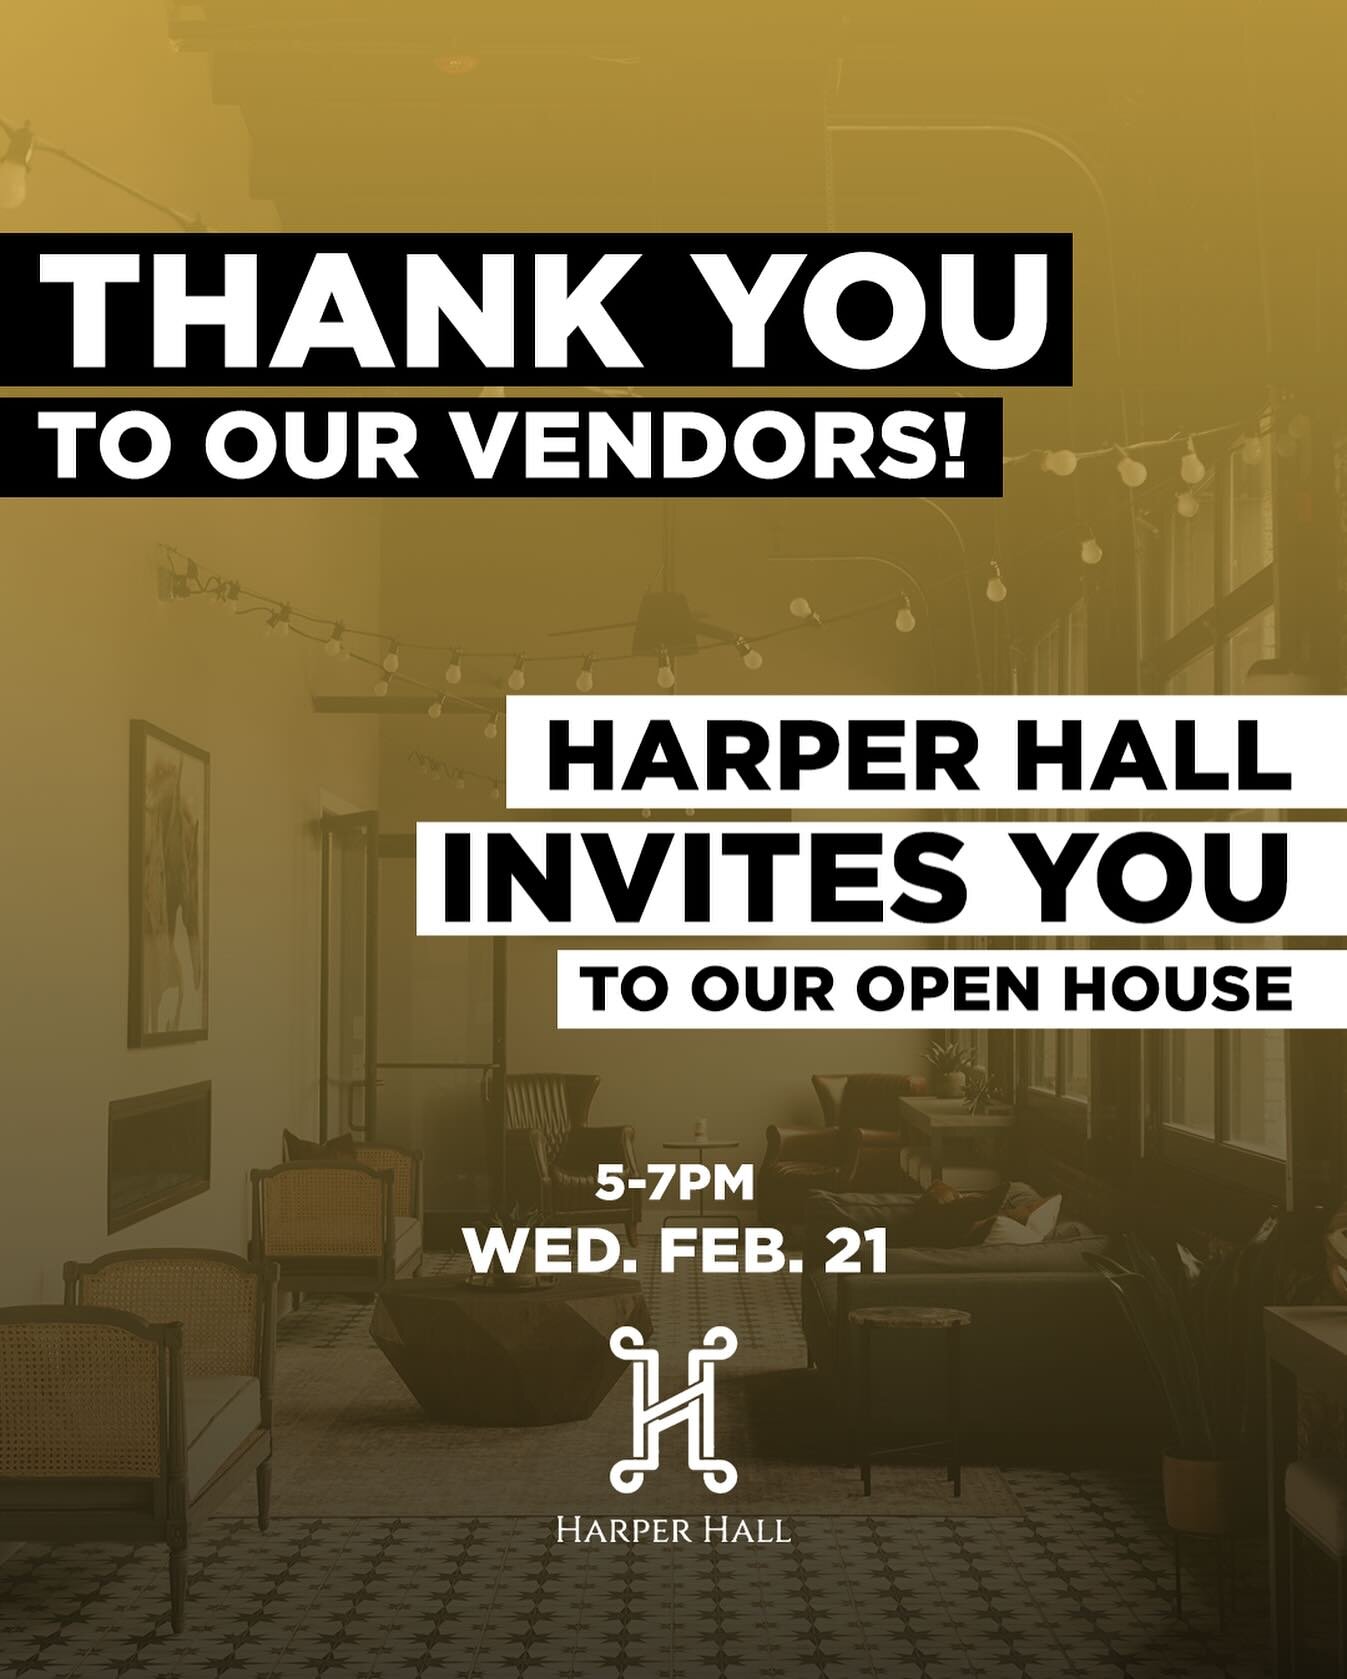 🚨VENDOR OPEN HOUSE

Wedding season is fast approaching and we are inviting all wedding vendors to visit Harper Hall on February 21st for our open house! We want to celebrate you and all the hard work that you bring to wedding season and show how Har